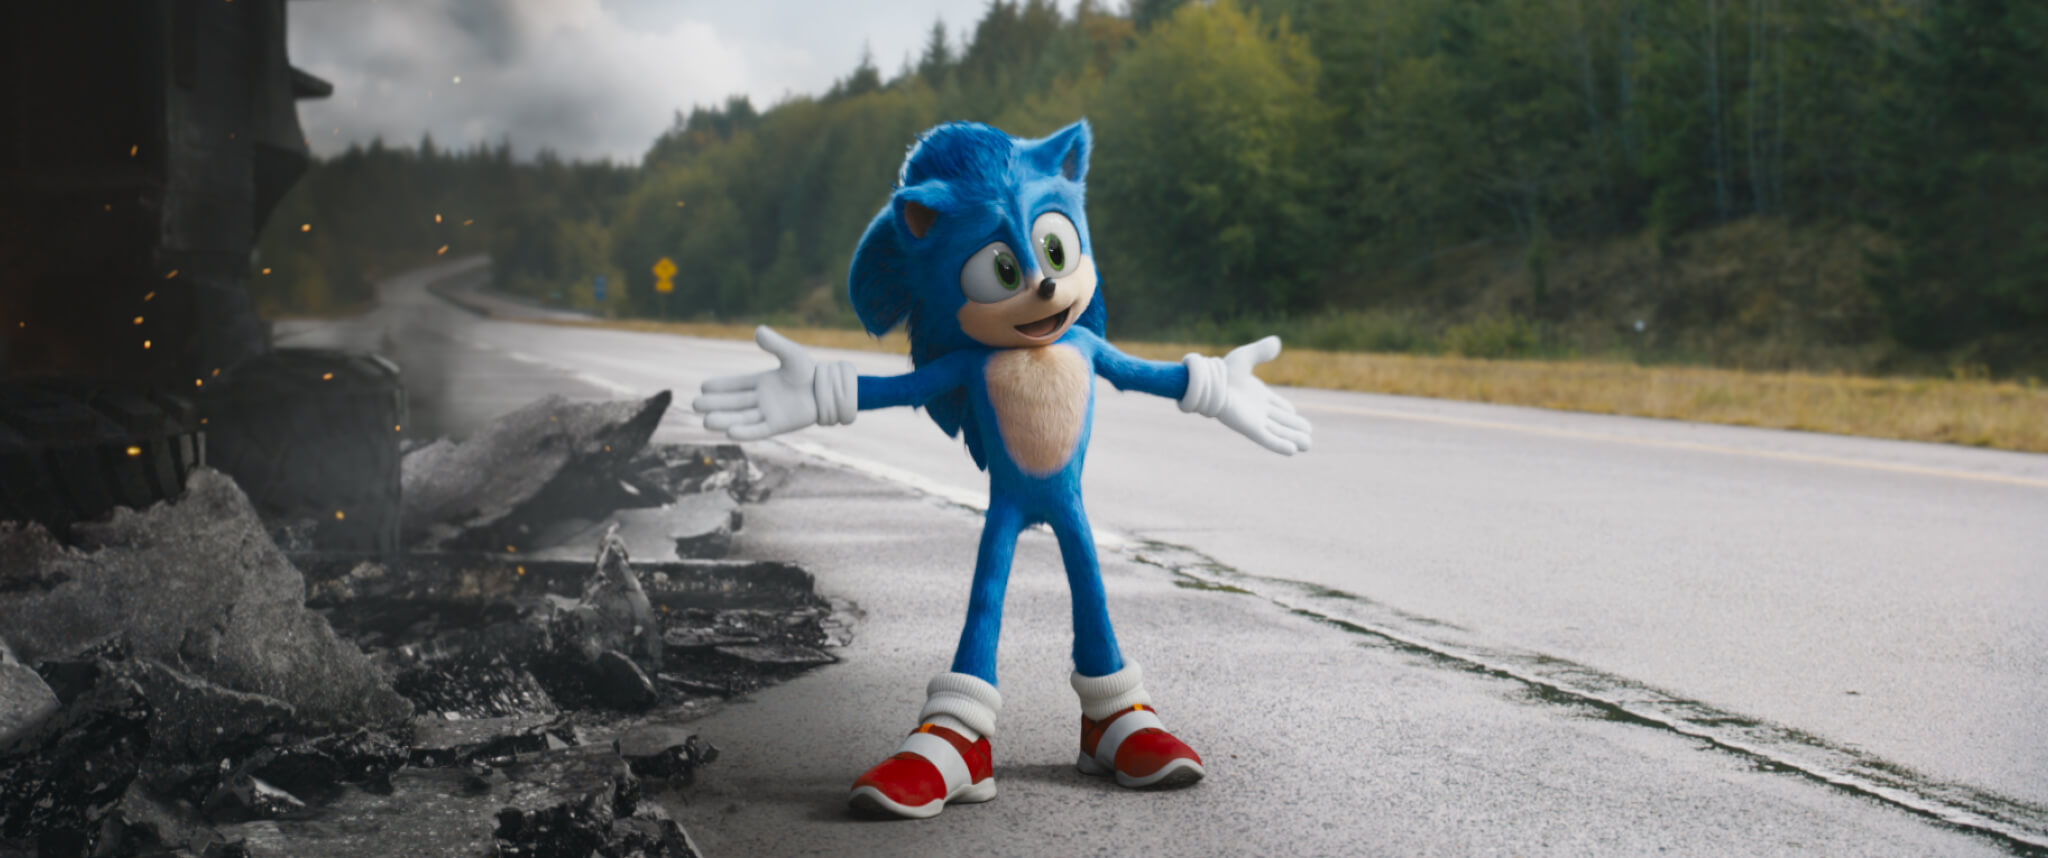 Sonic-the-Hedgehog-kids-action-movies